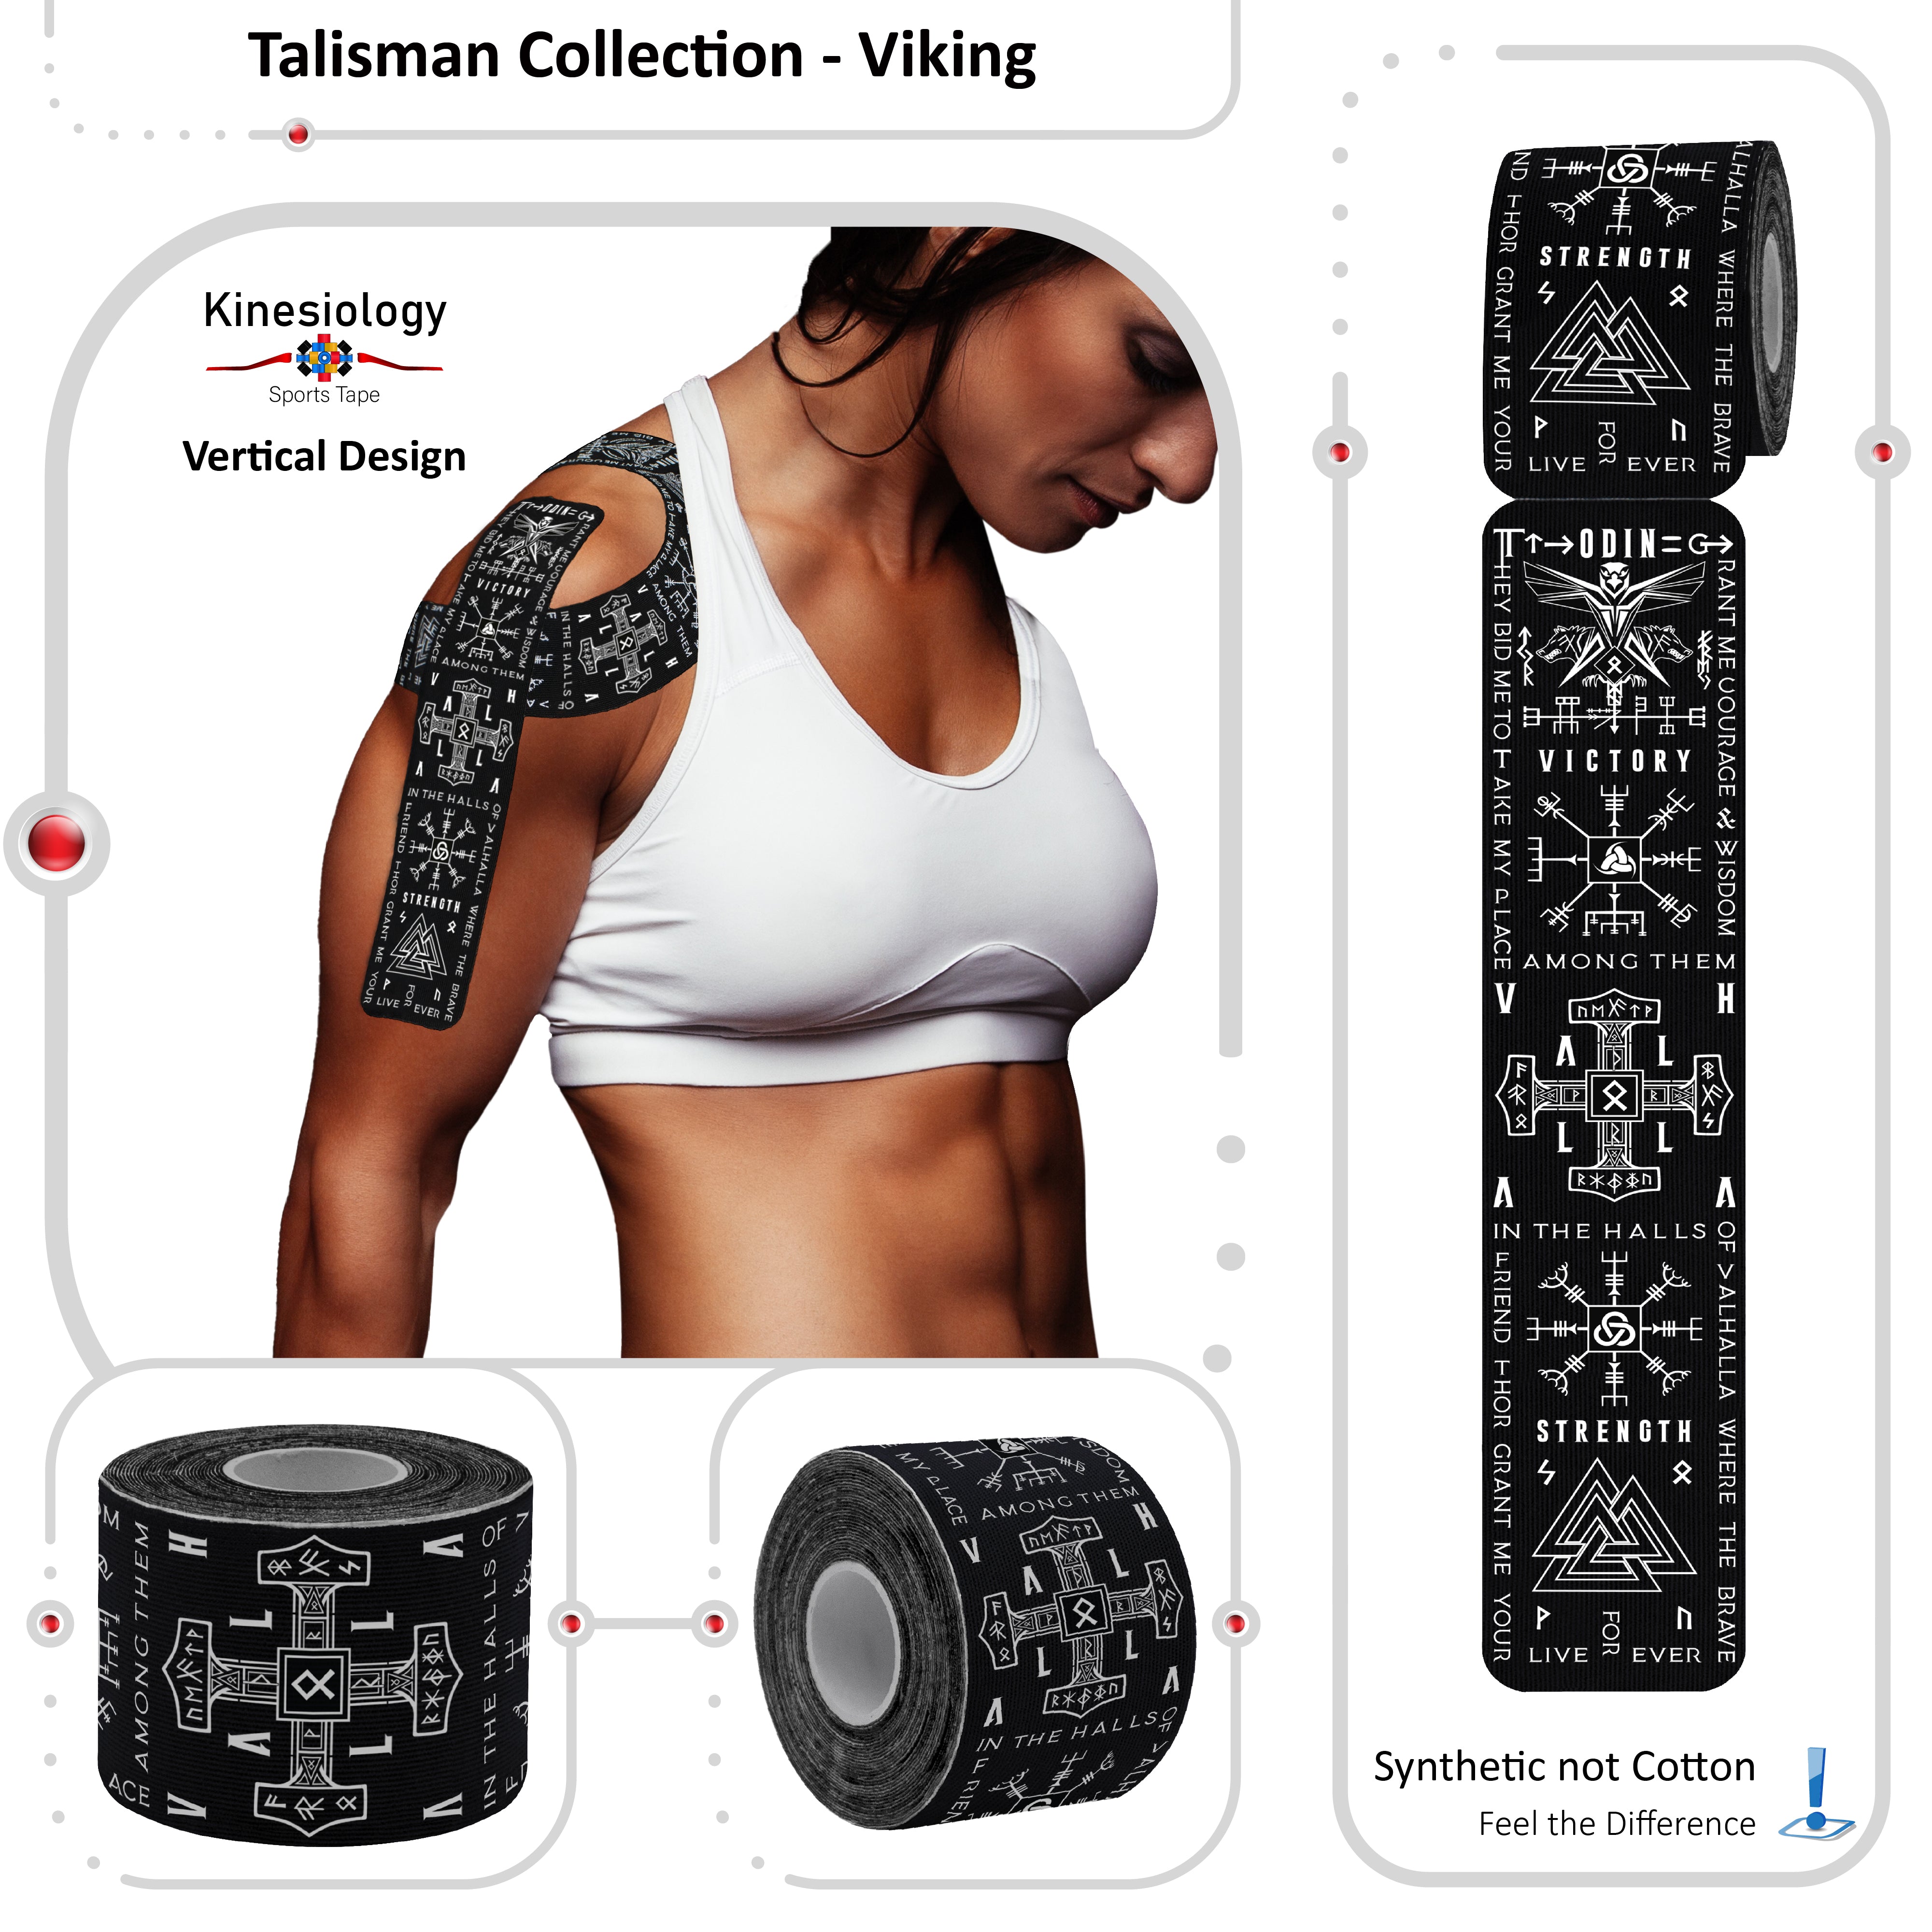 Black Kinesiology Tape Pre Cut with Dispenser - Talisman - Viking - Vertical Design - Athletic Sports Tape - For Healing and Recovery